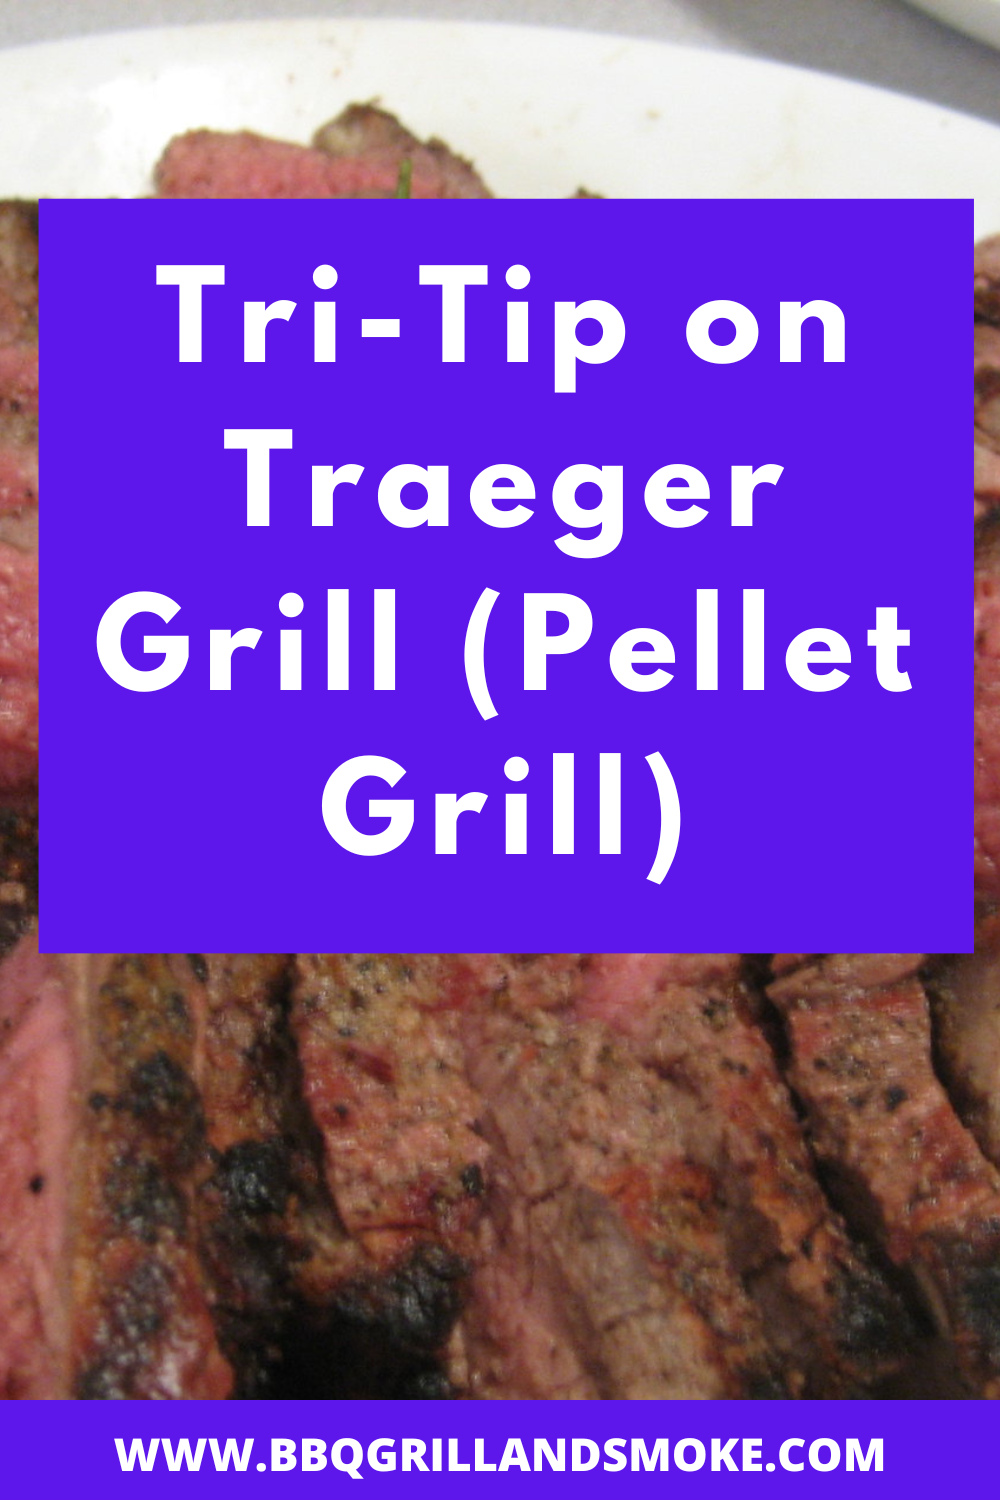 Tri-Tip on Traeger Grill (Pellet Grill) - BBQ Grill and Smoke